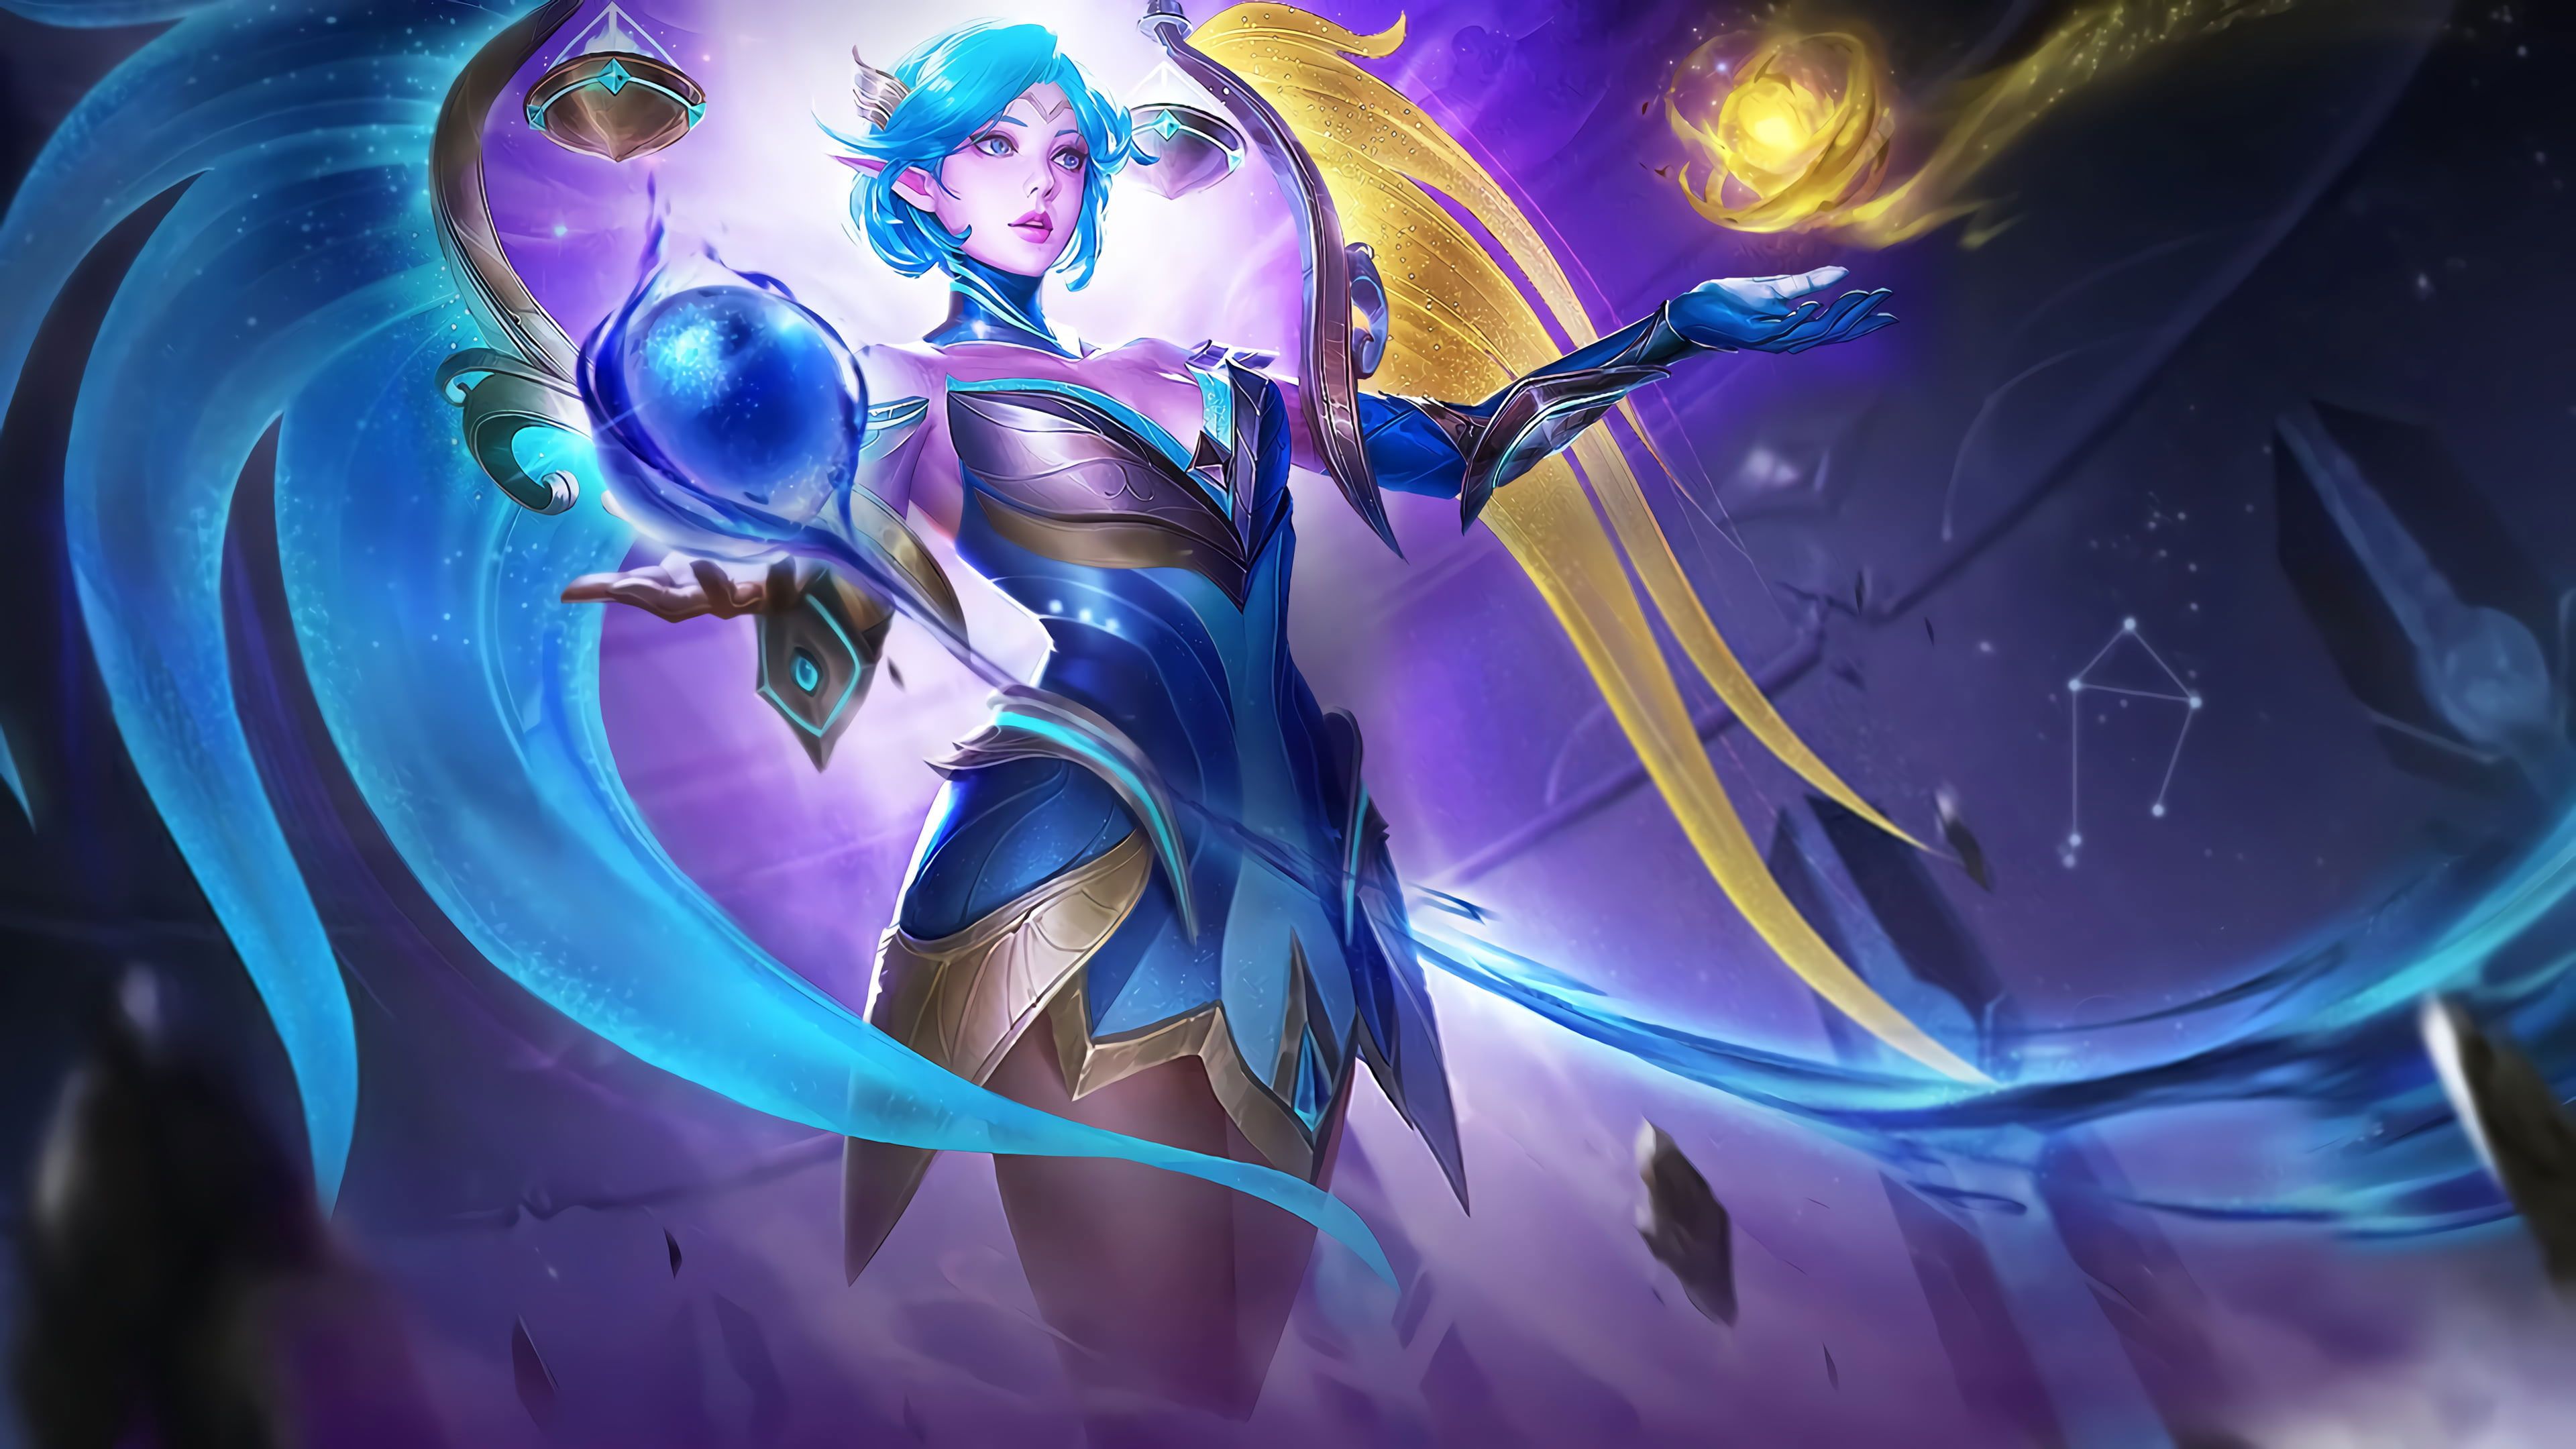 A female character with wings and blue hair - Libra